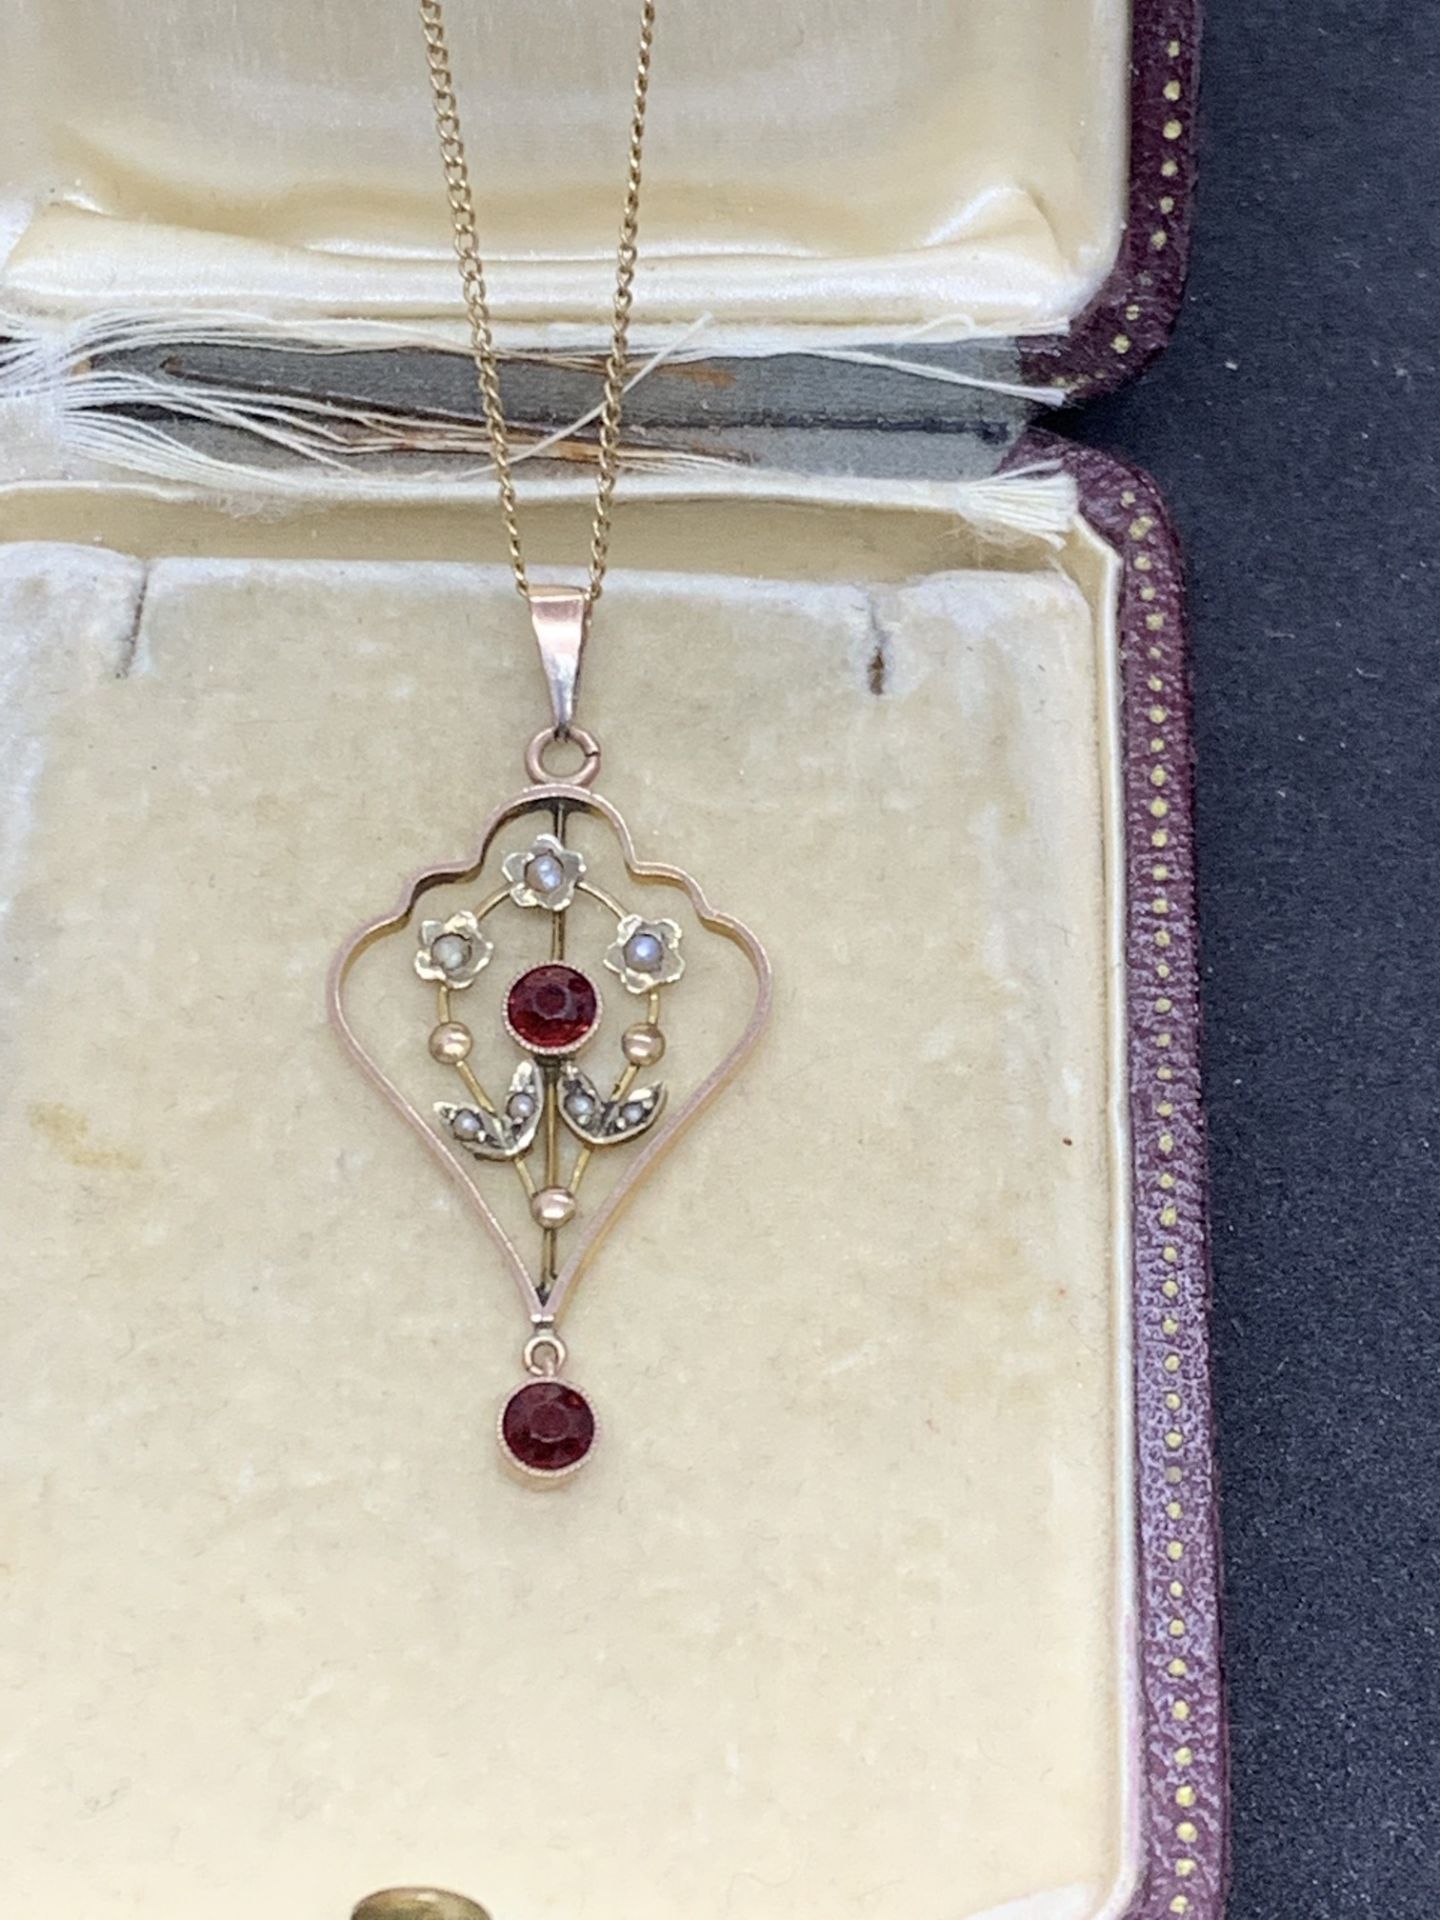 ANTIQUE RUBY & SEED PEARL PENDANT & CHAIN - Image 3 of 3